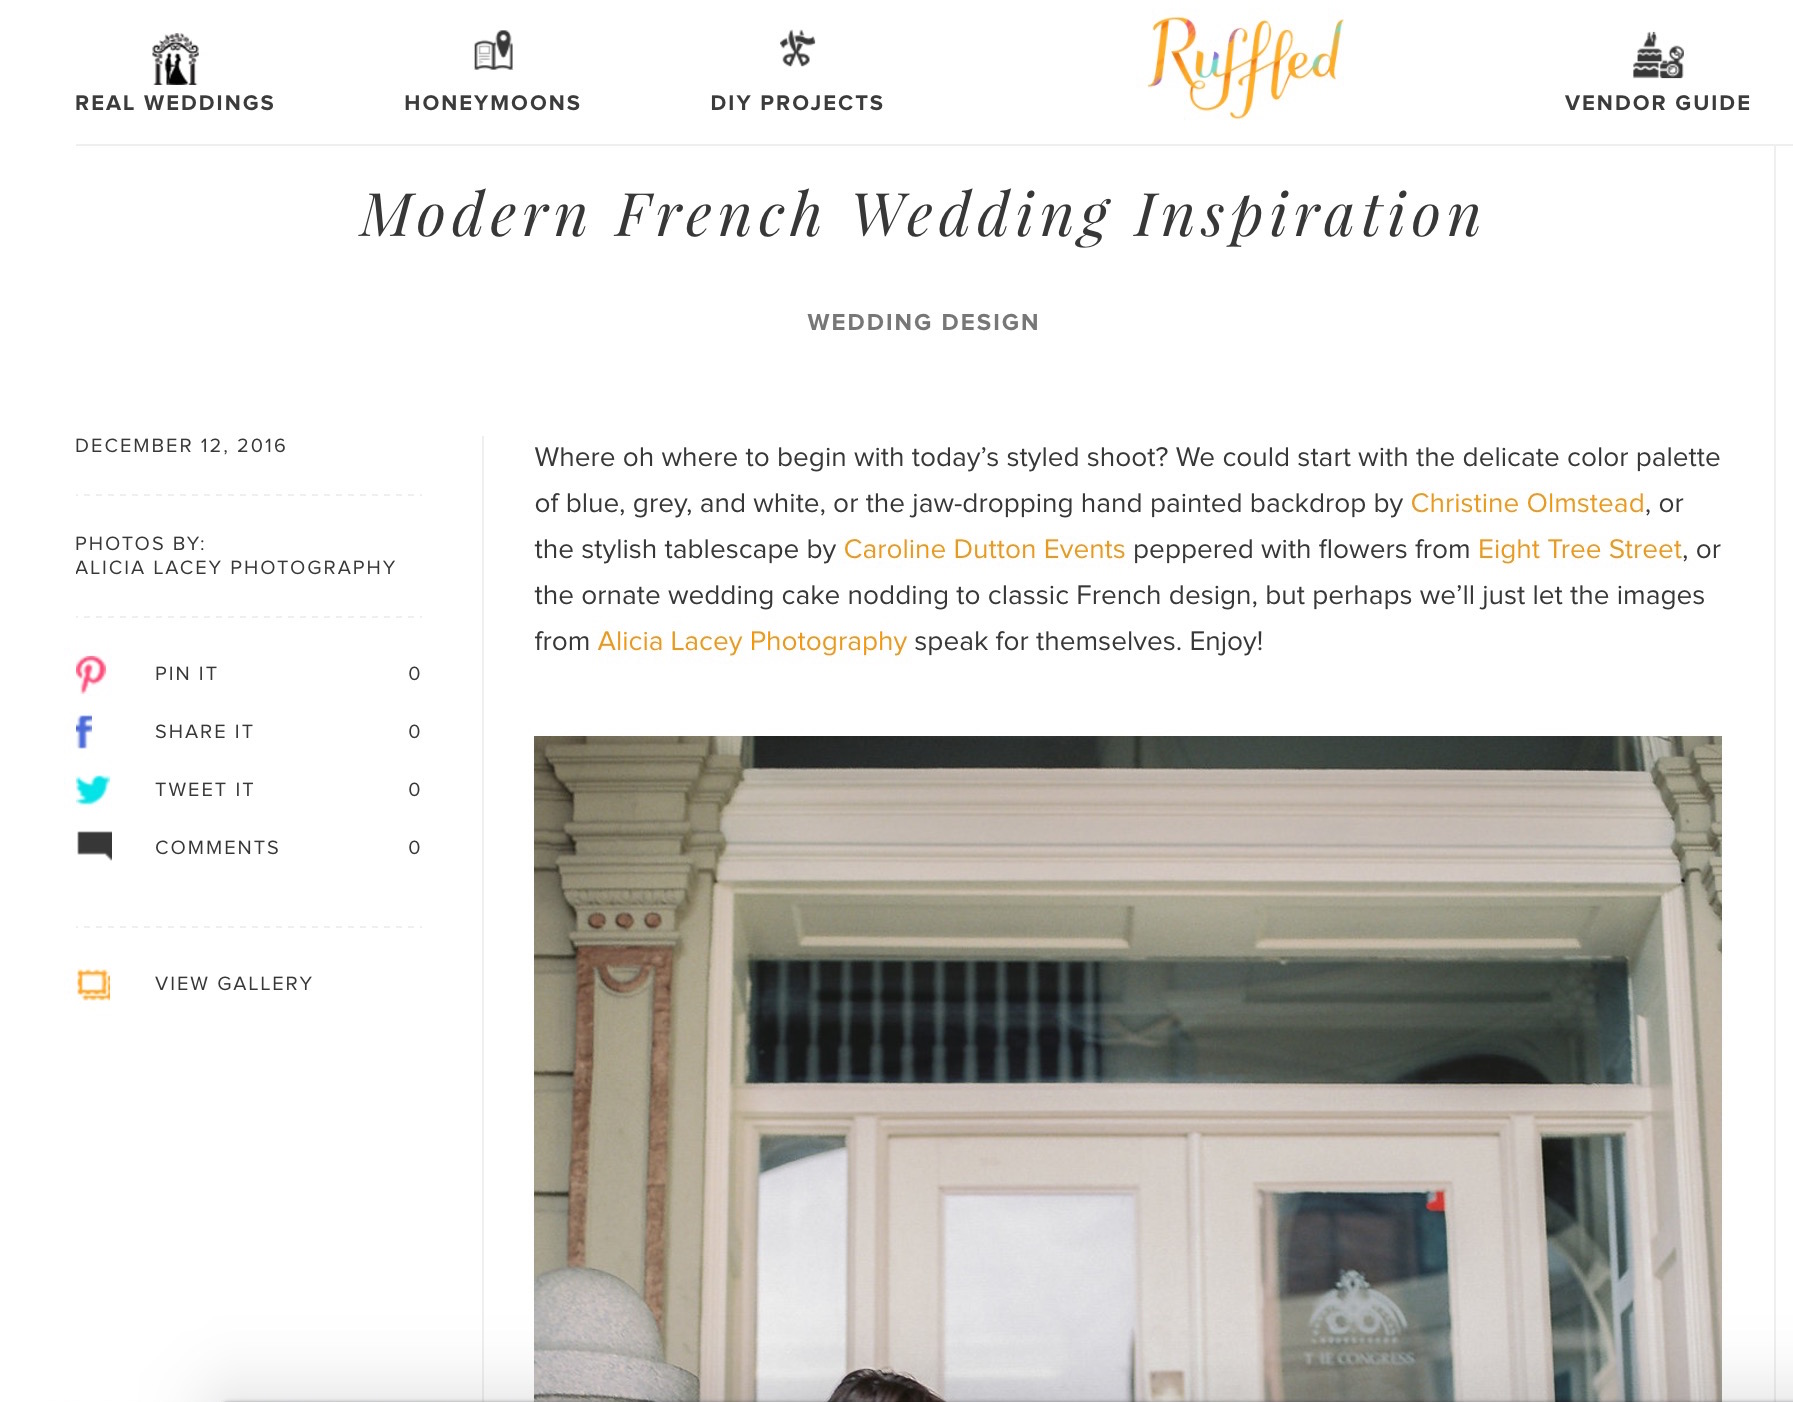 This gorgeous Washington, DC wedding has a Modern French Theme complete with a soft blue and cream palette. It is featured on the prestigious blog, Ruffled.